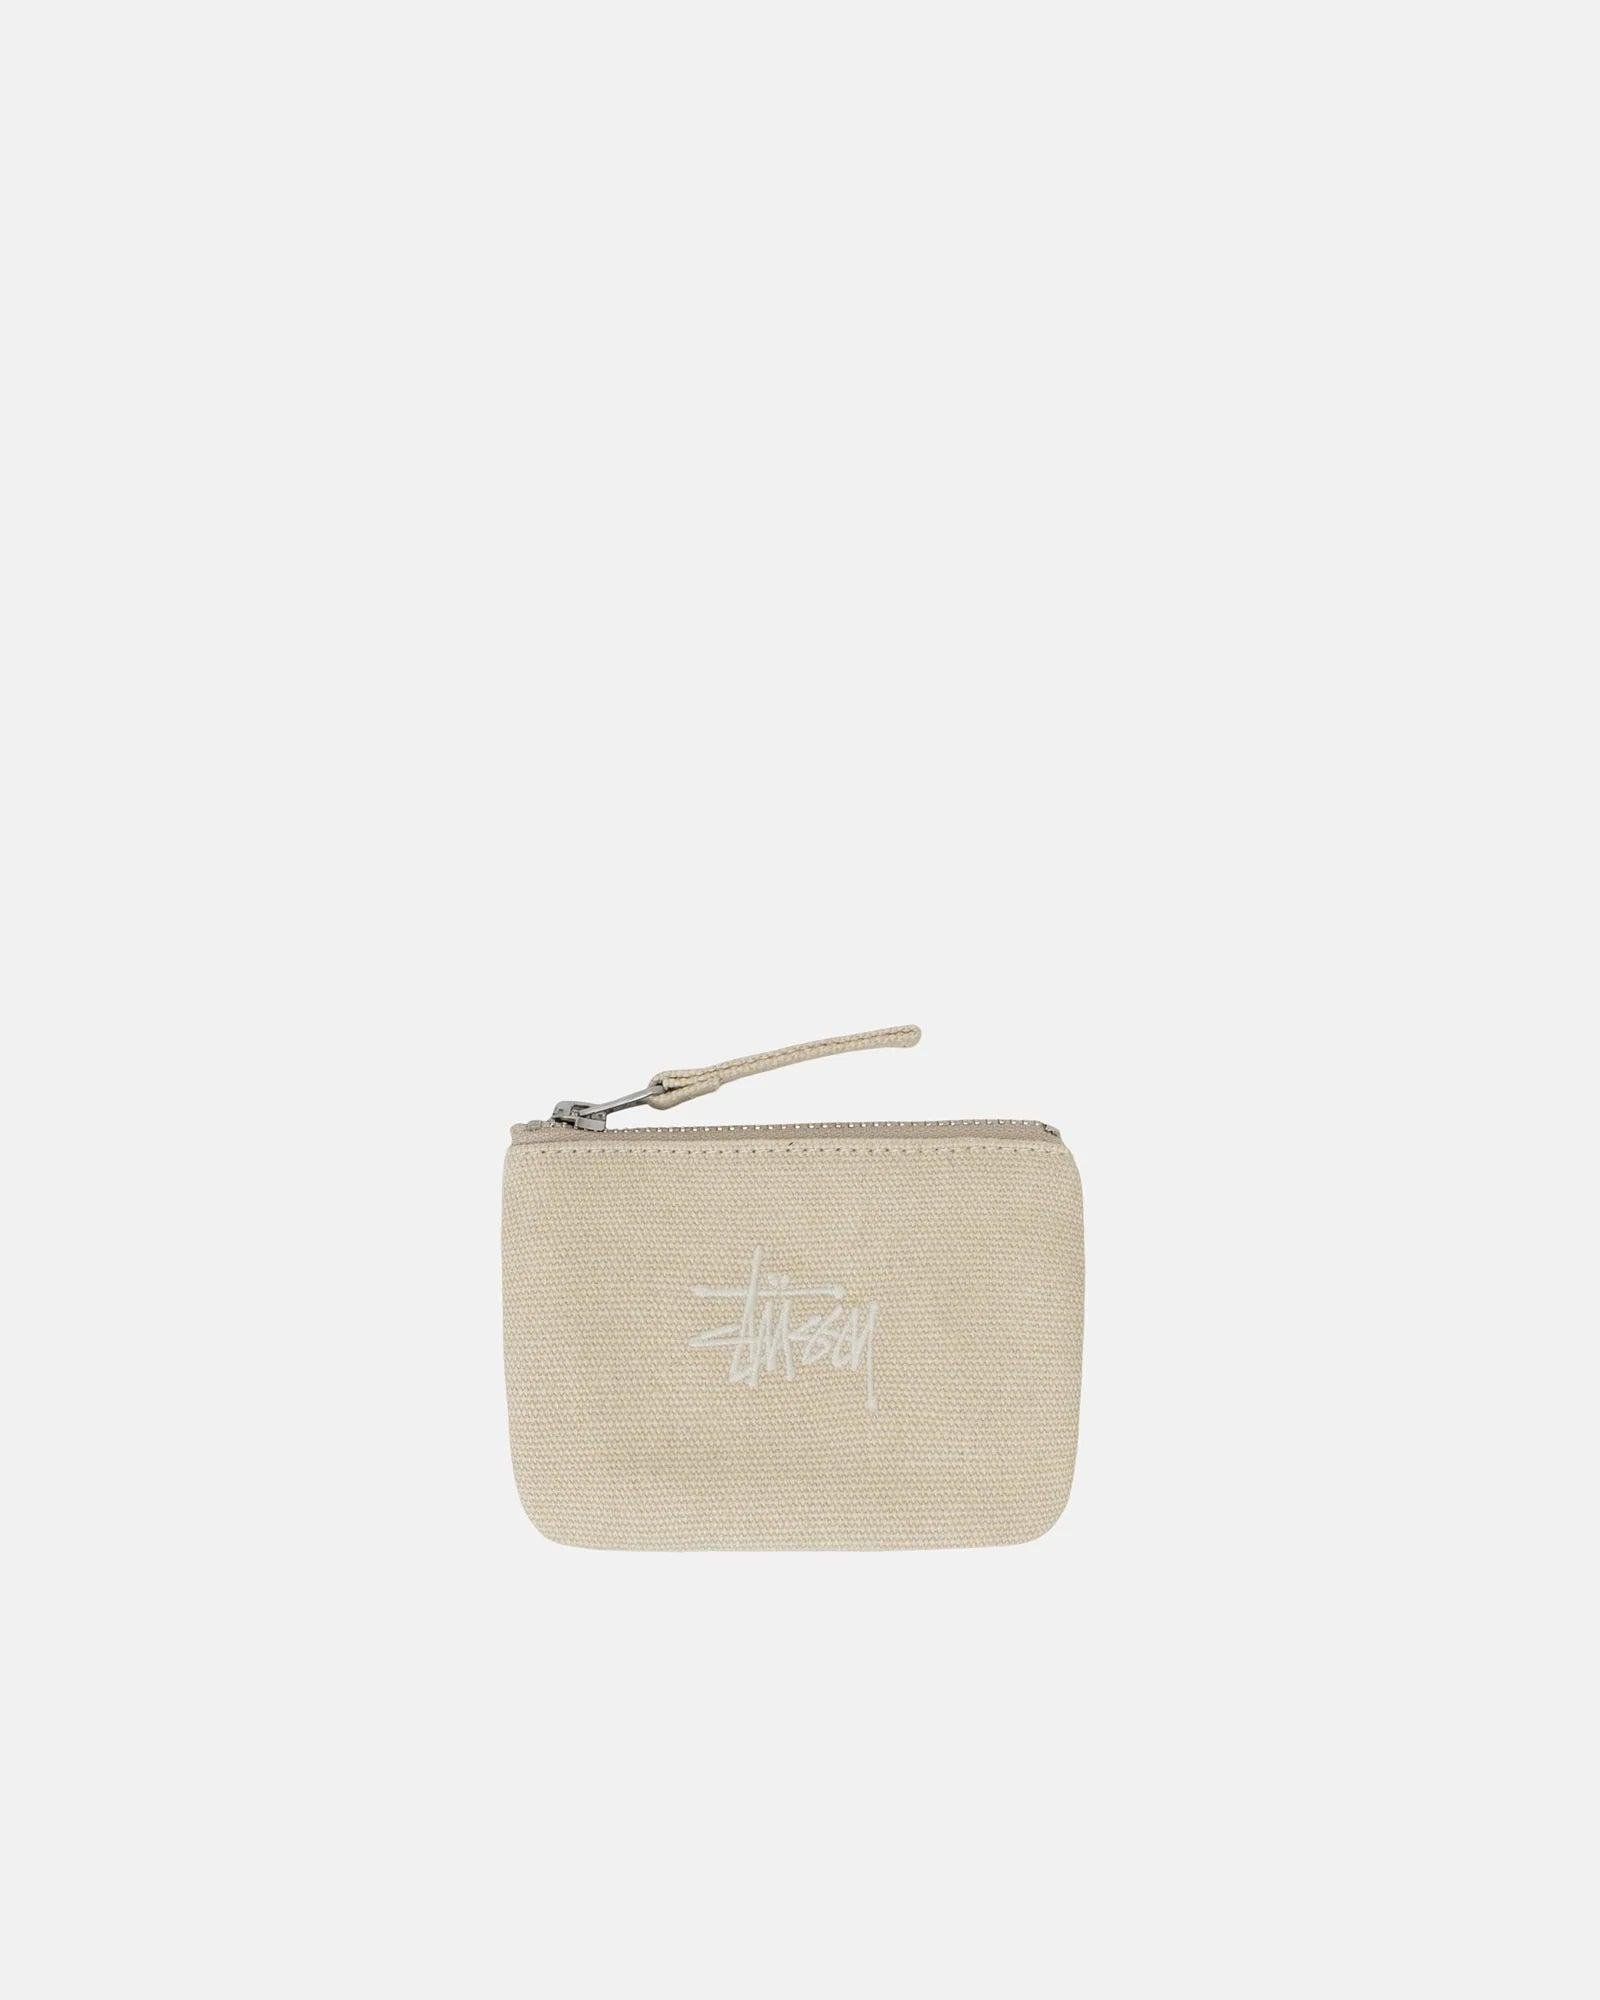 Stussy - Men's Canvas Coin Pouch - (Natural) by STUSSY